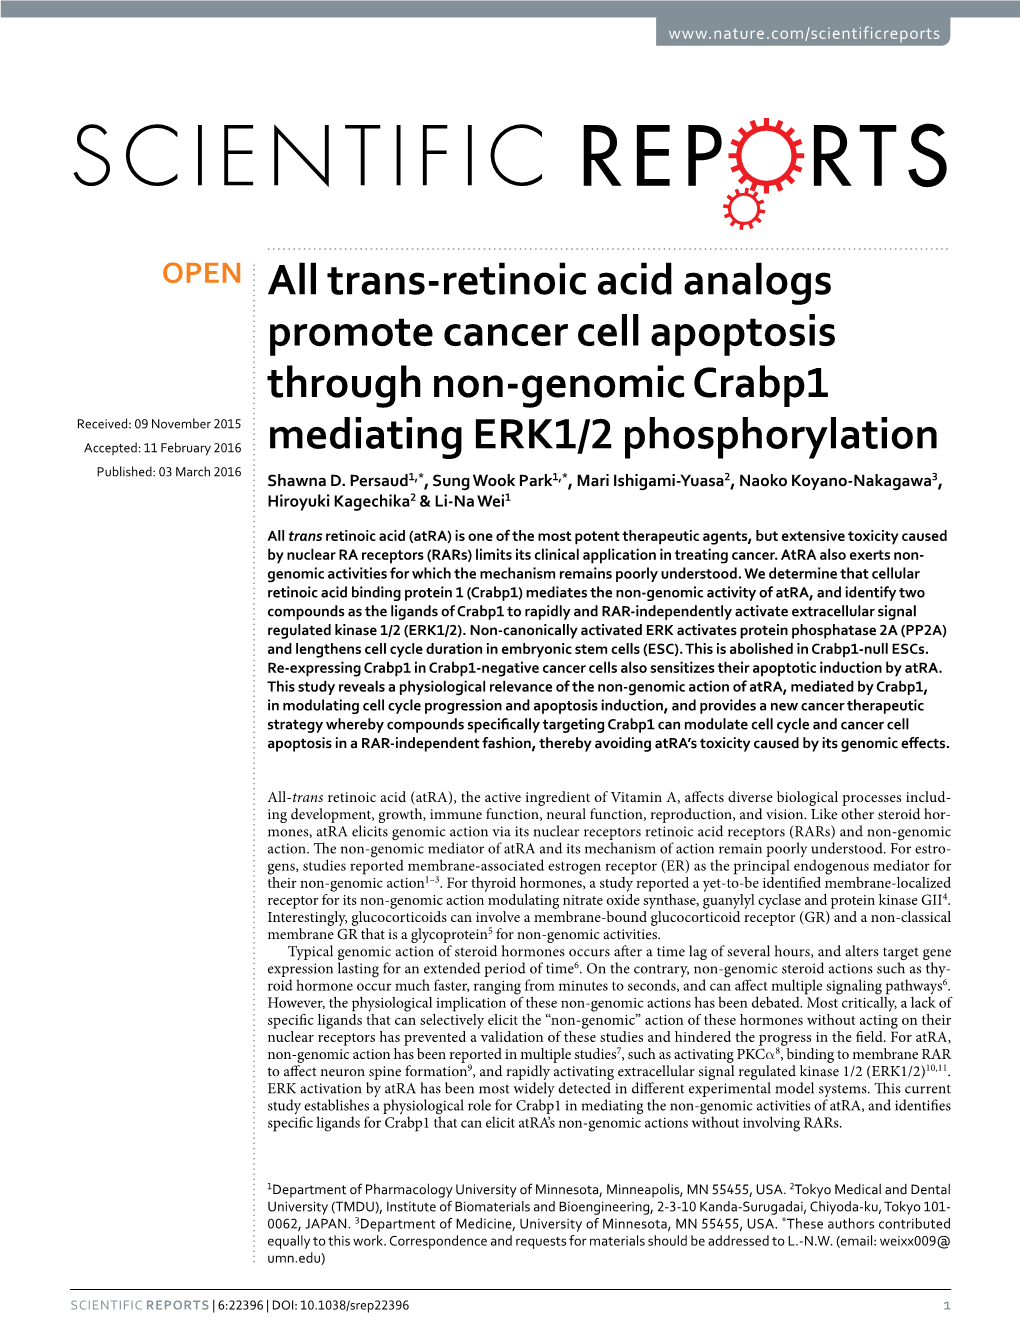 Trans-Retinoic Acid Analogs Promote Cancer Cell